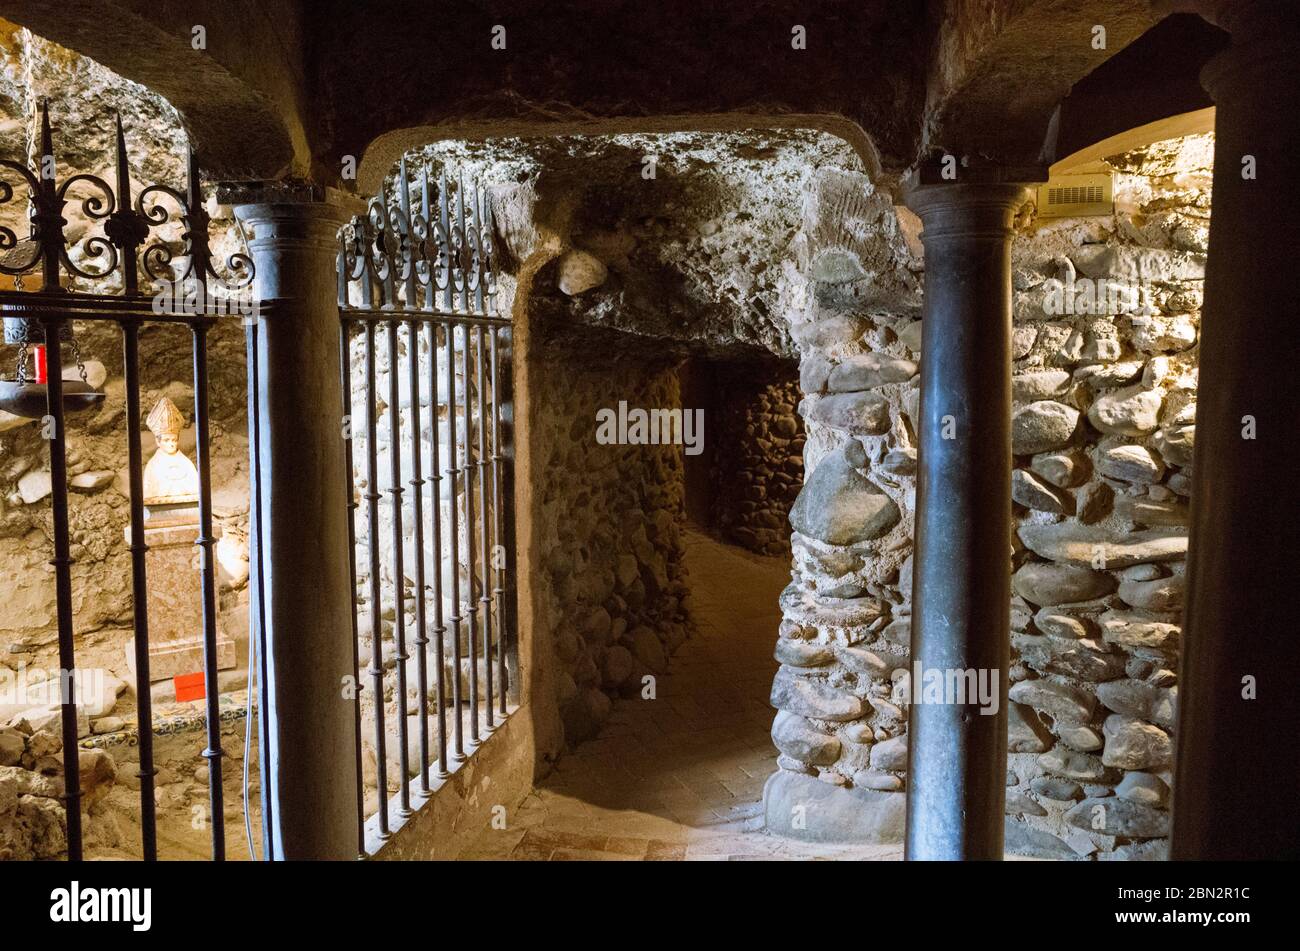 Granada, Spain : Holy Caves of the Abbey of Sacromonte where the alleged relics of the first Christians martyrs and evangelizers of Roman Baetica; inc Stock Photo